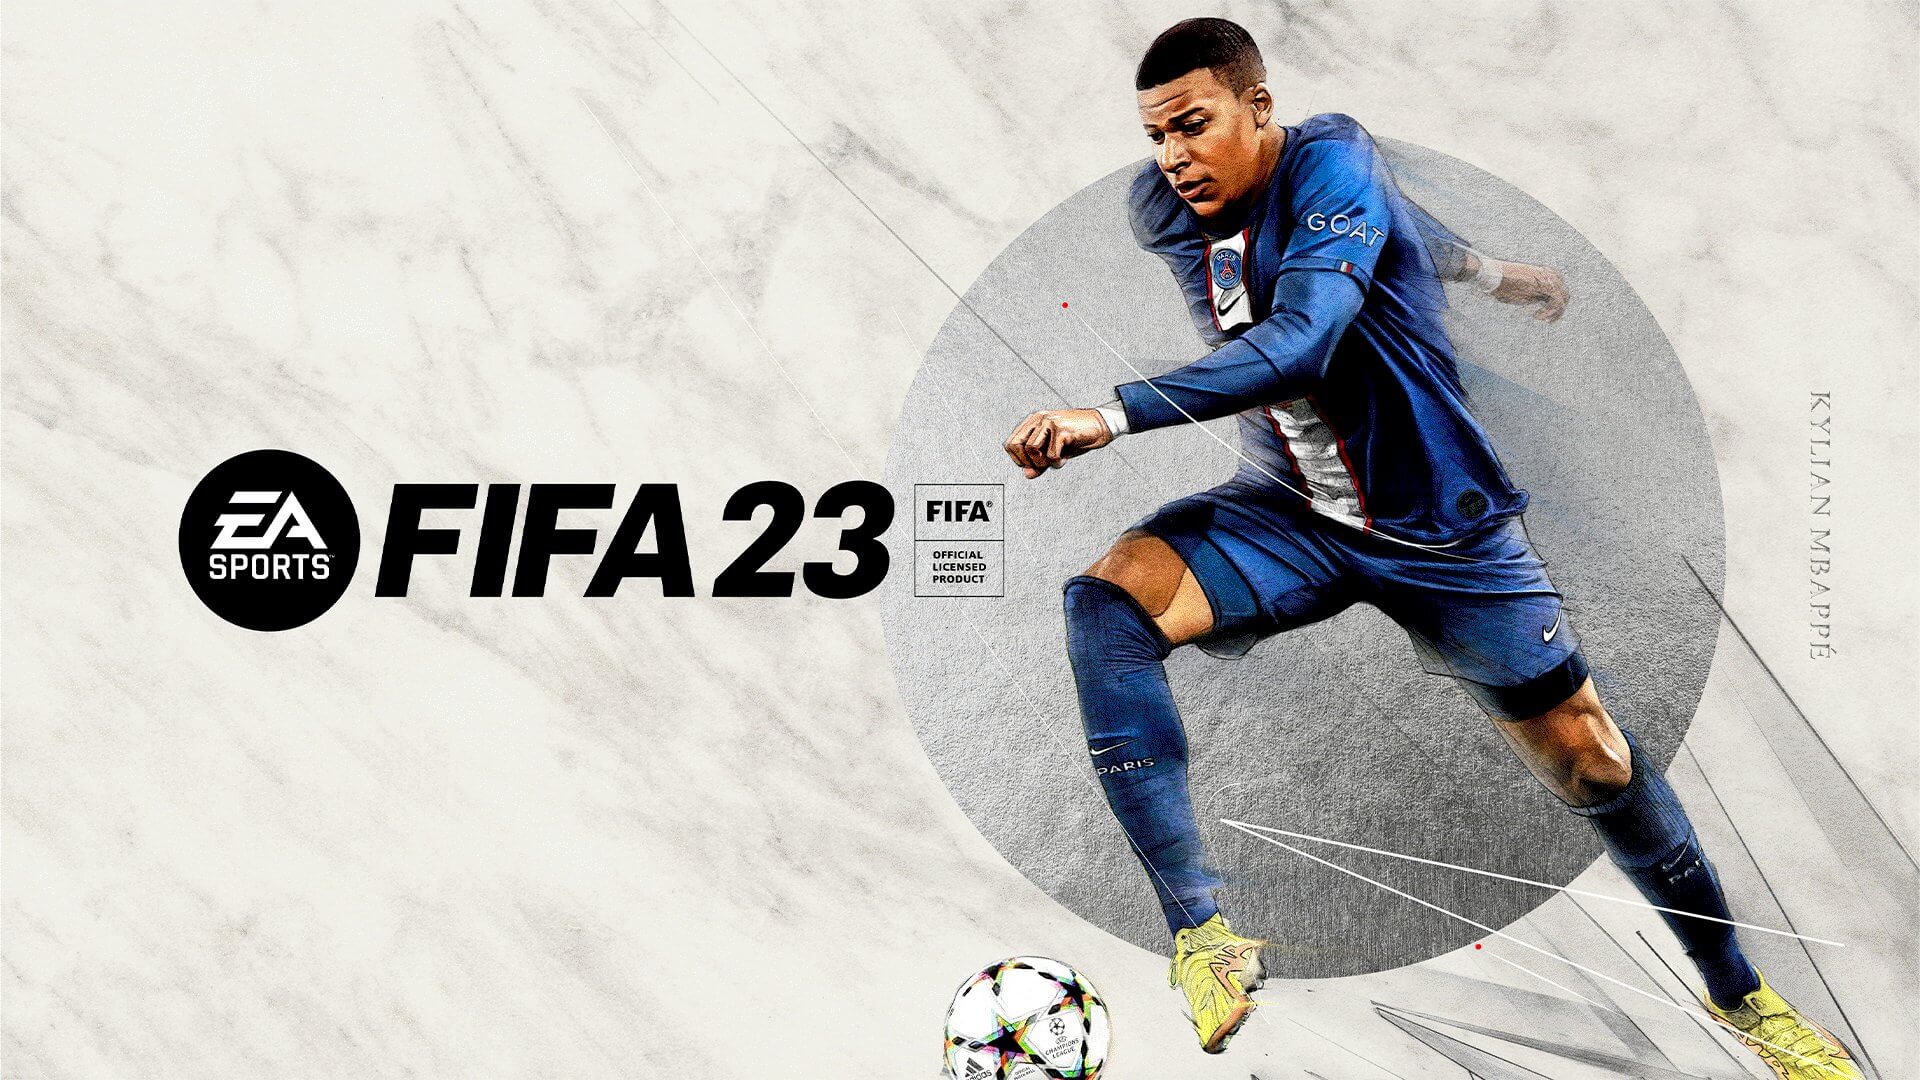 [STEAM] FIFA 2023 - FRESH 0 HOURS PLAYED - FULL ACCESS